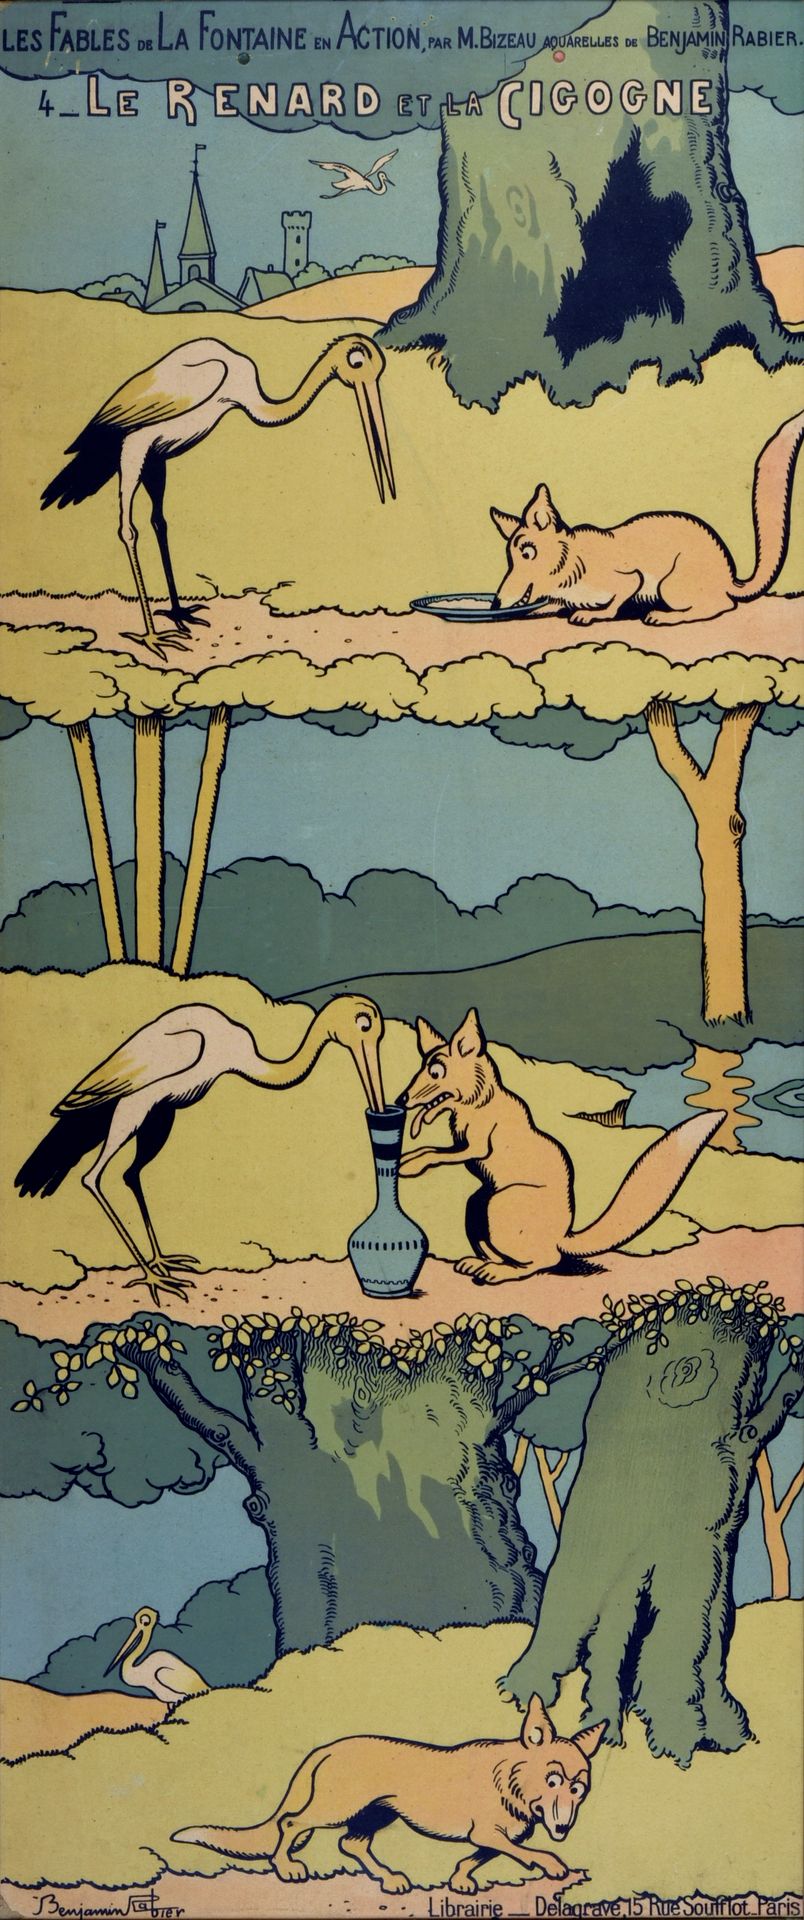 RABIER The Fables of the Fountain in action.

N°4. The fox and the stork

Framed&hellip;